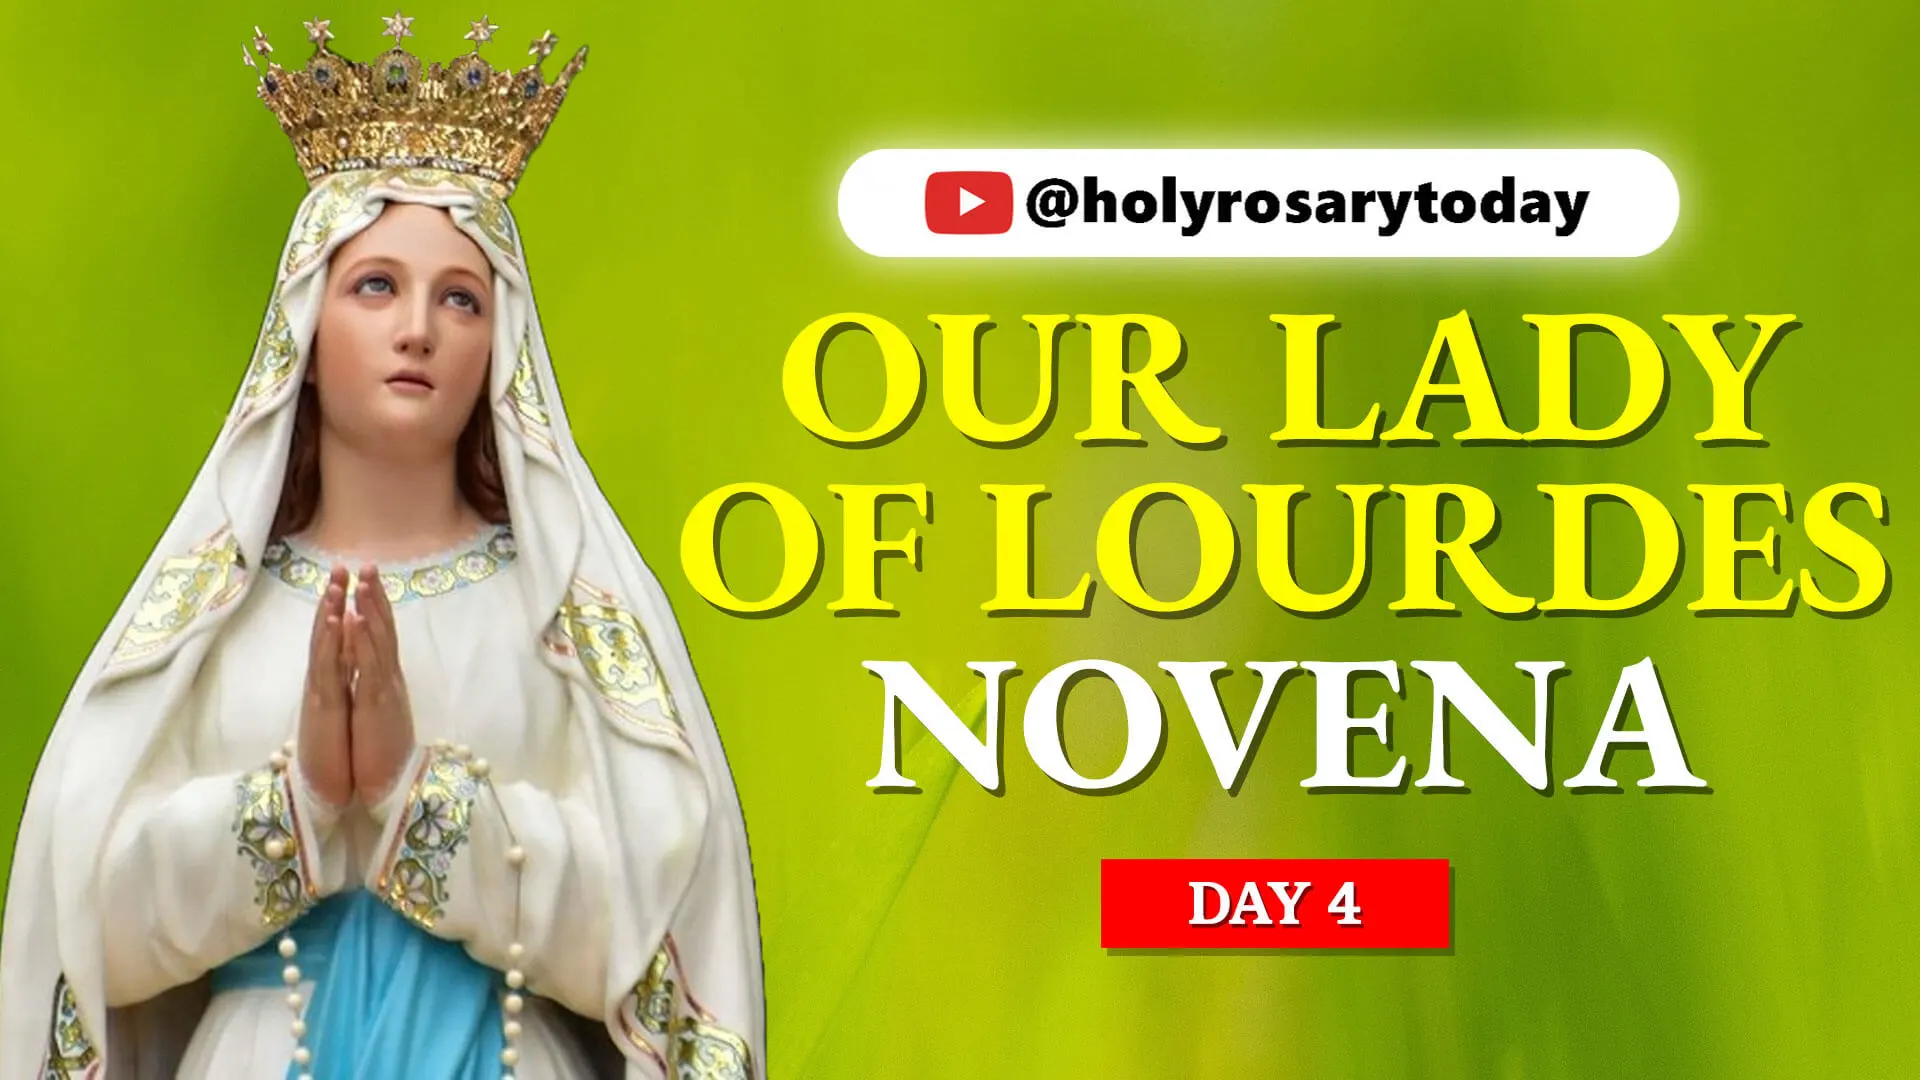 Our Lady of Lourdes Novena Day 4